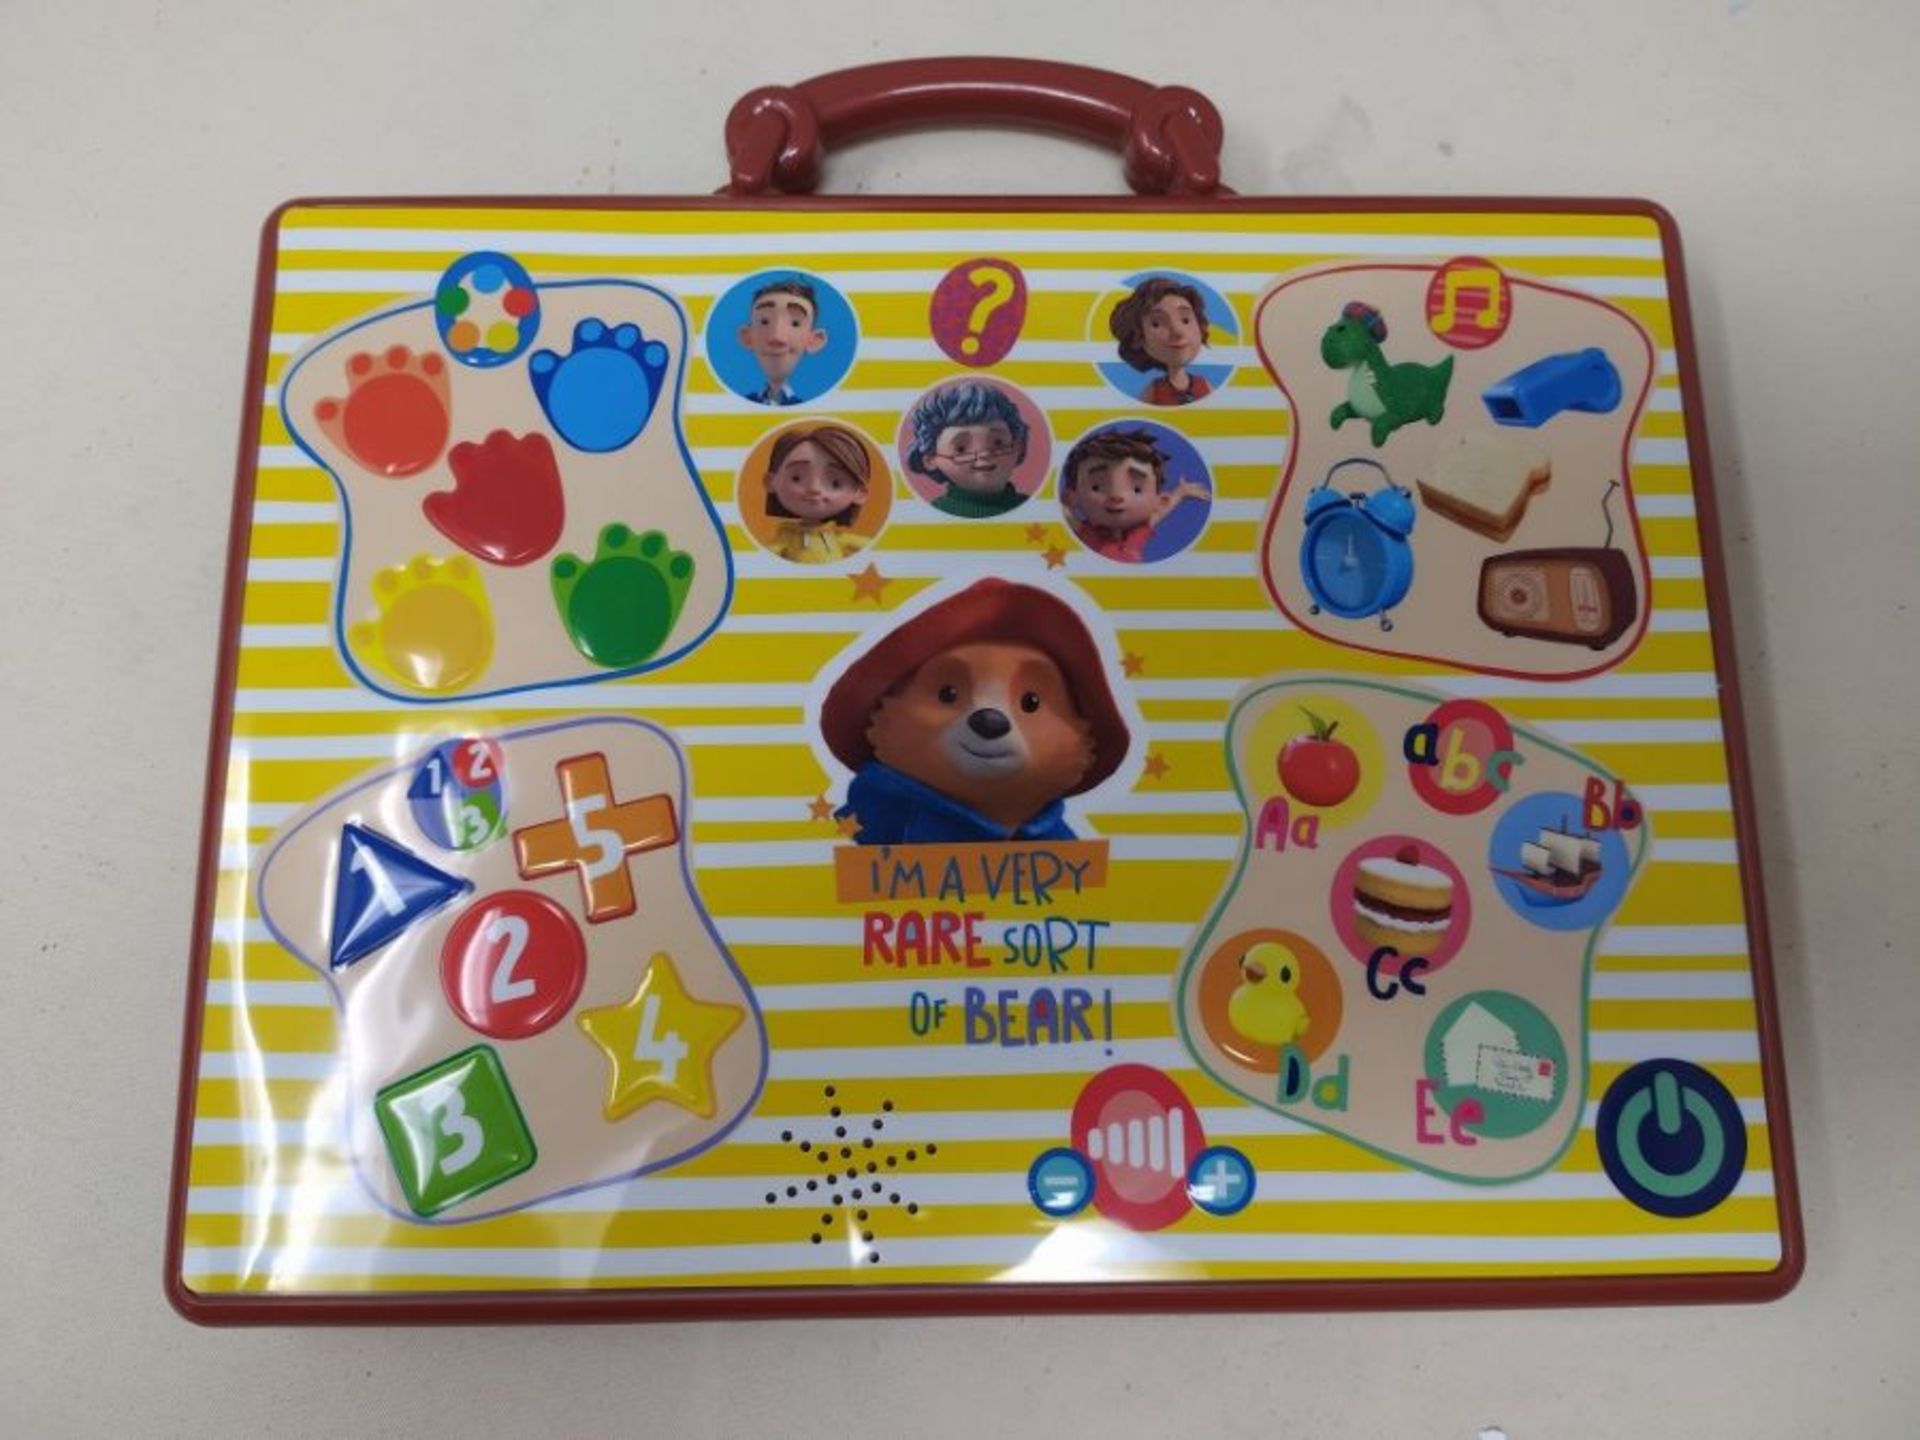 Paddington and Friends PB22 Interactive Tablet - Image 2 of 2